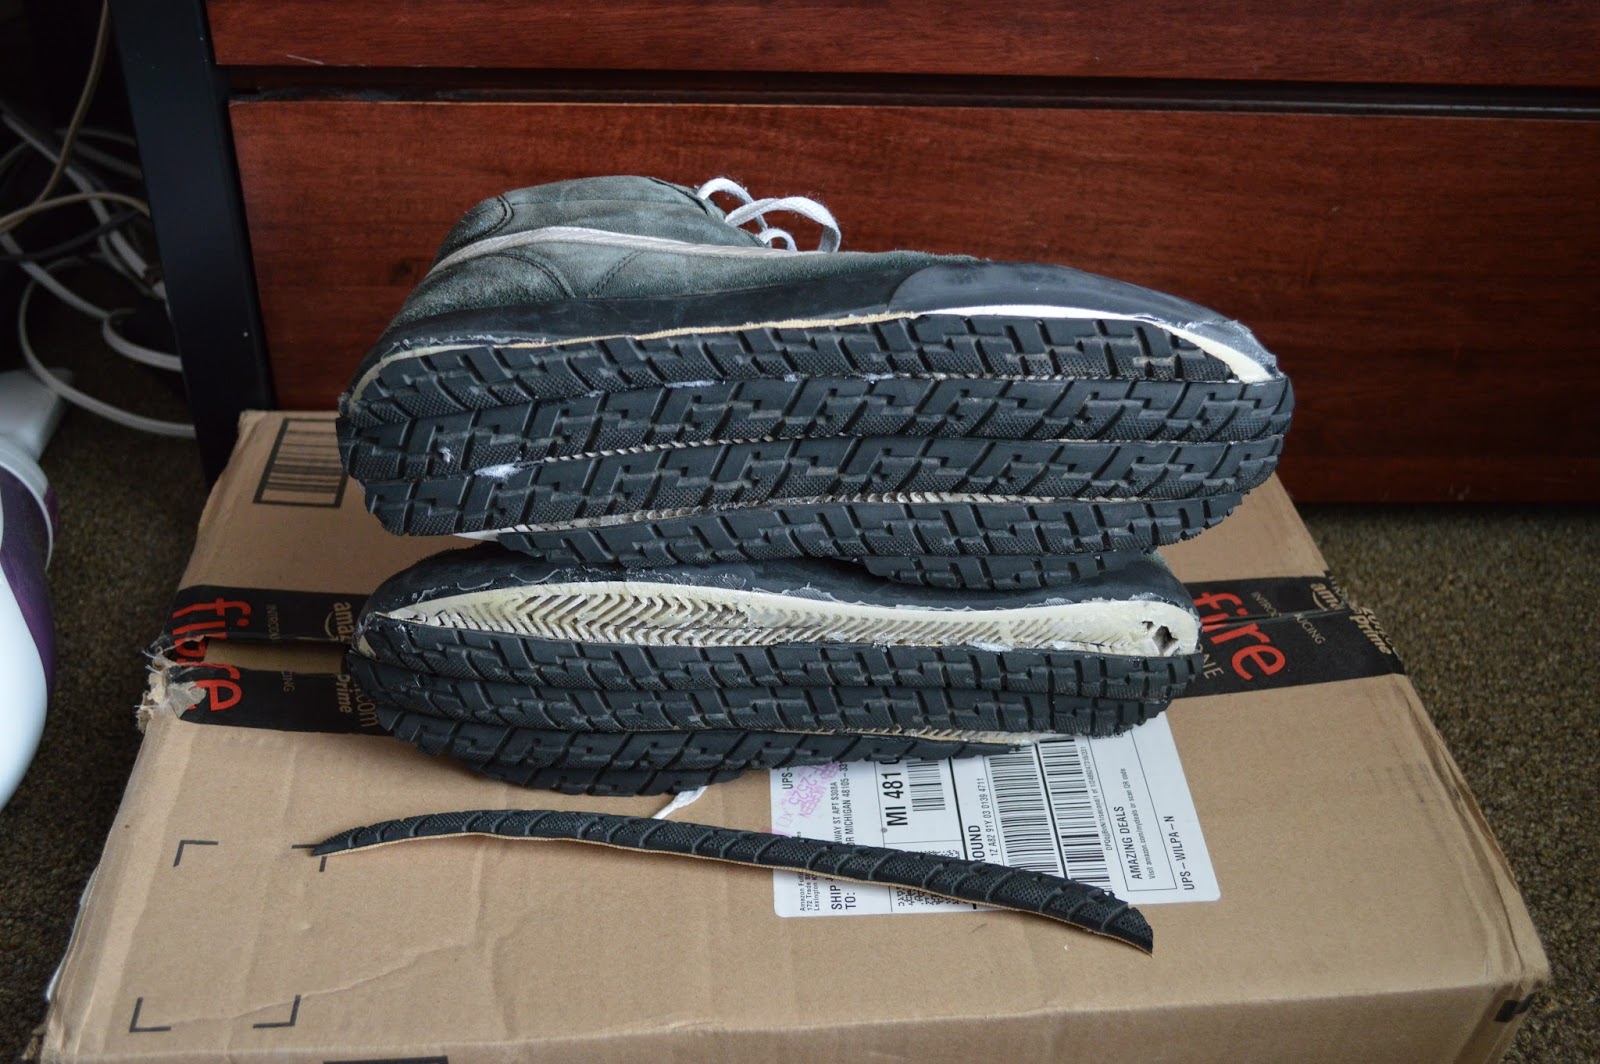 J-turn: Repairing Shoes with Rubber from Bikes